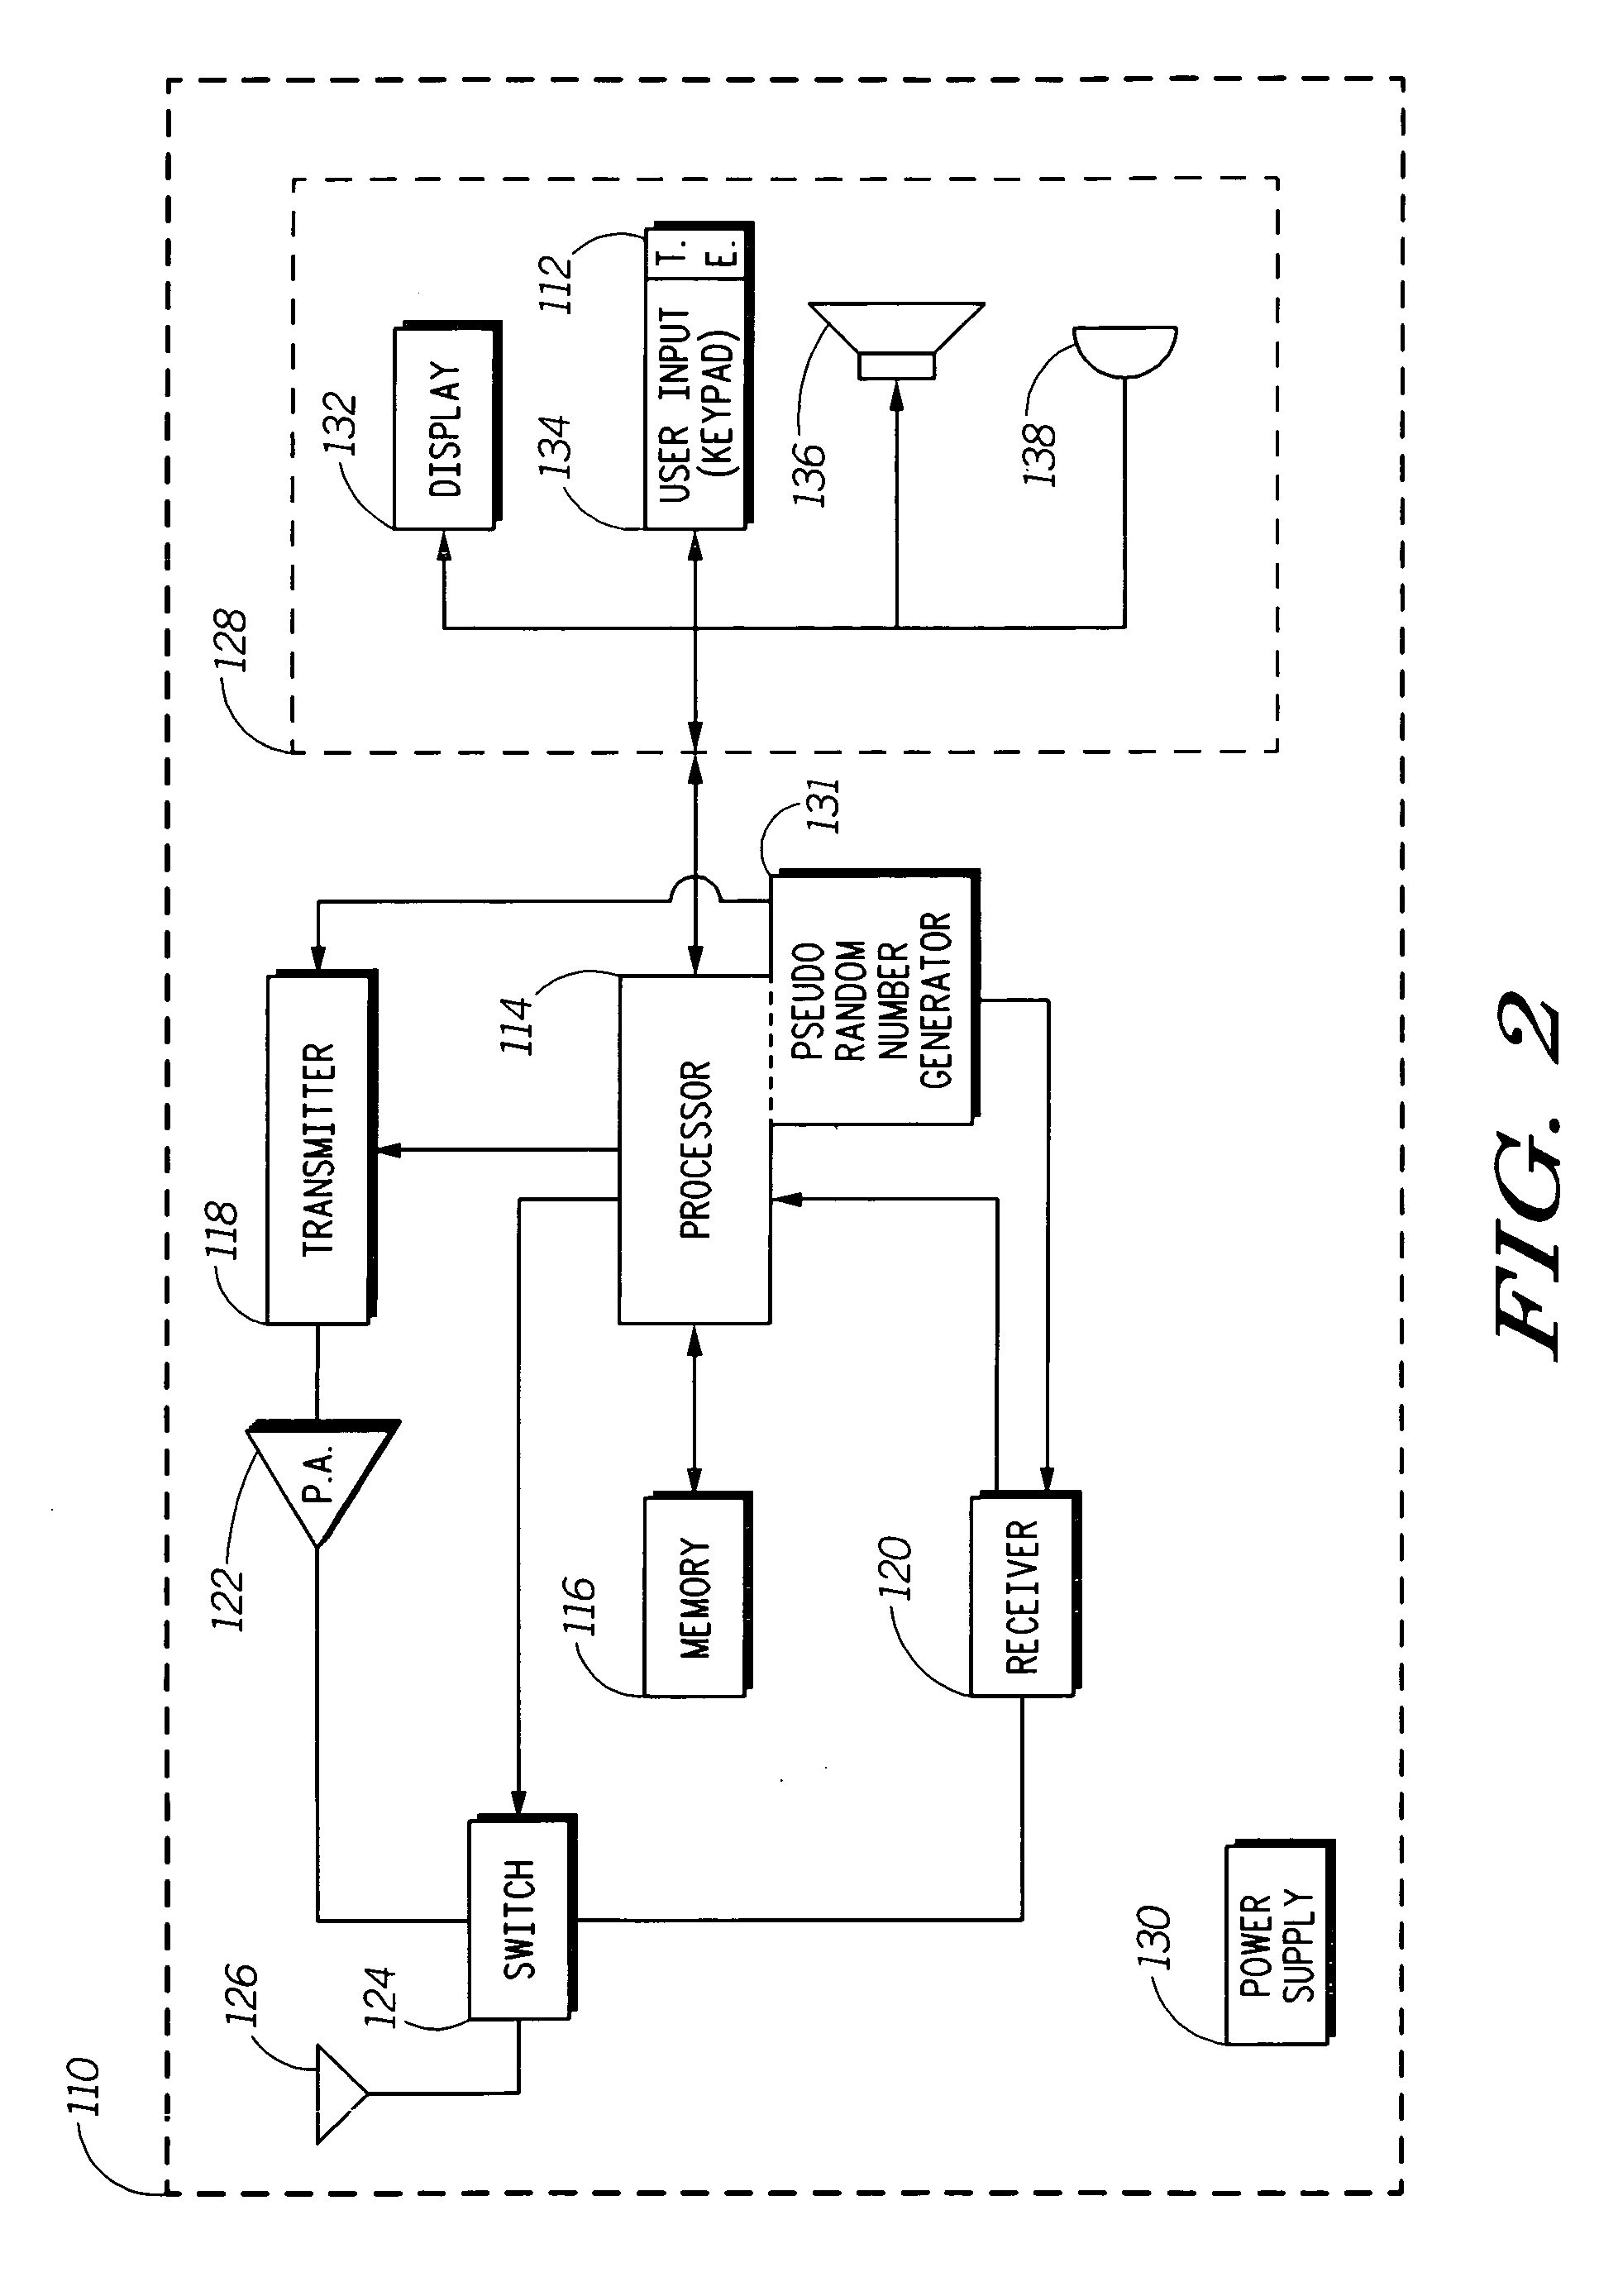 Method and system for collision avoidance in wireless communications